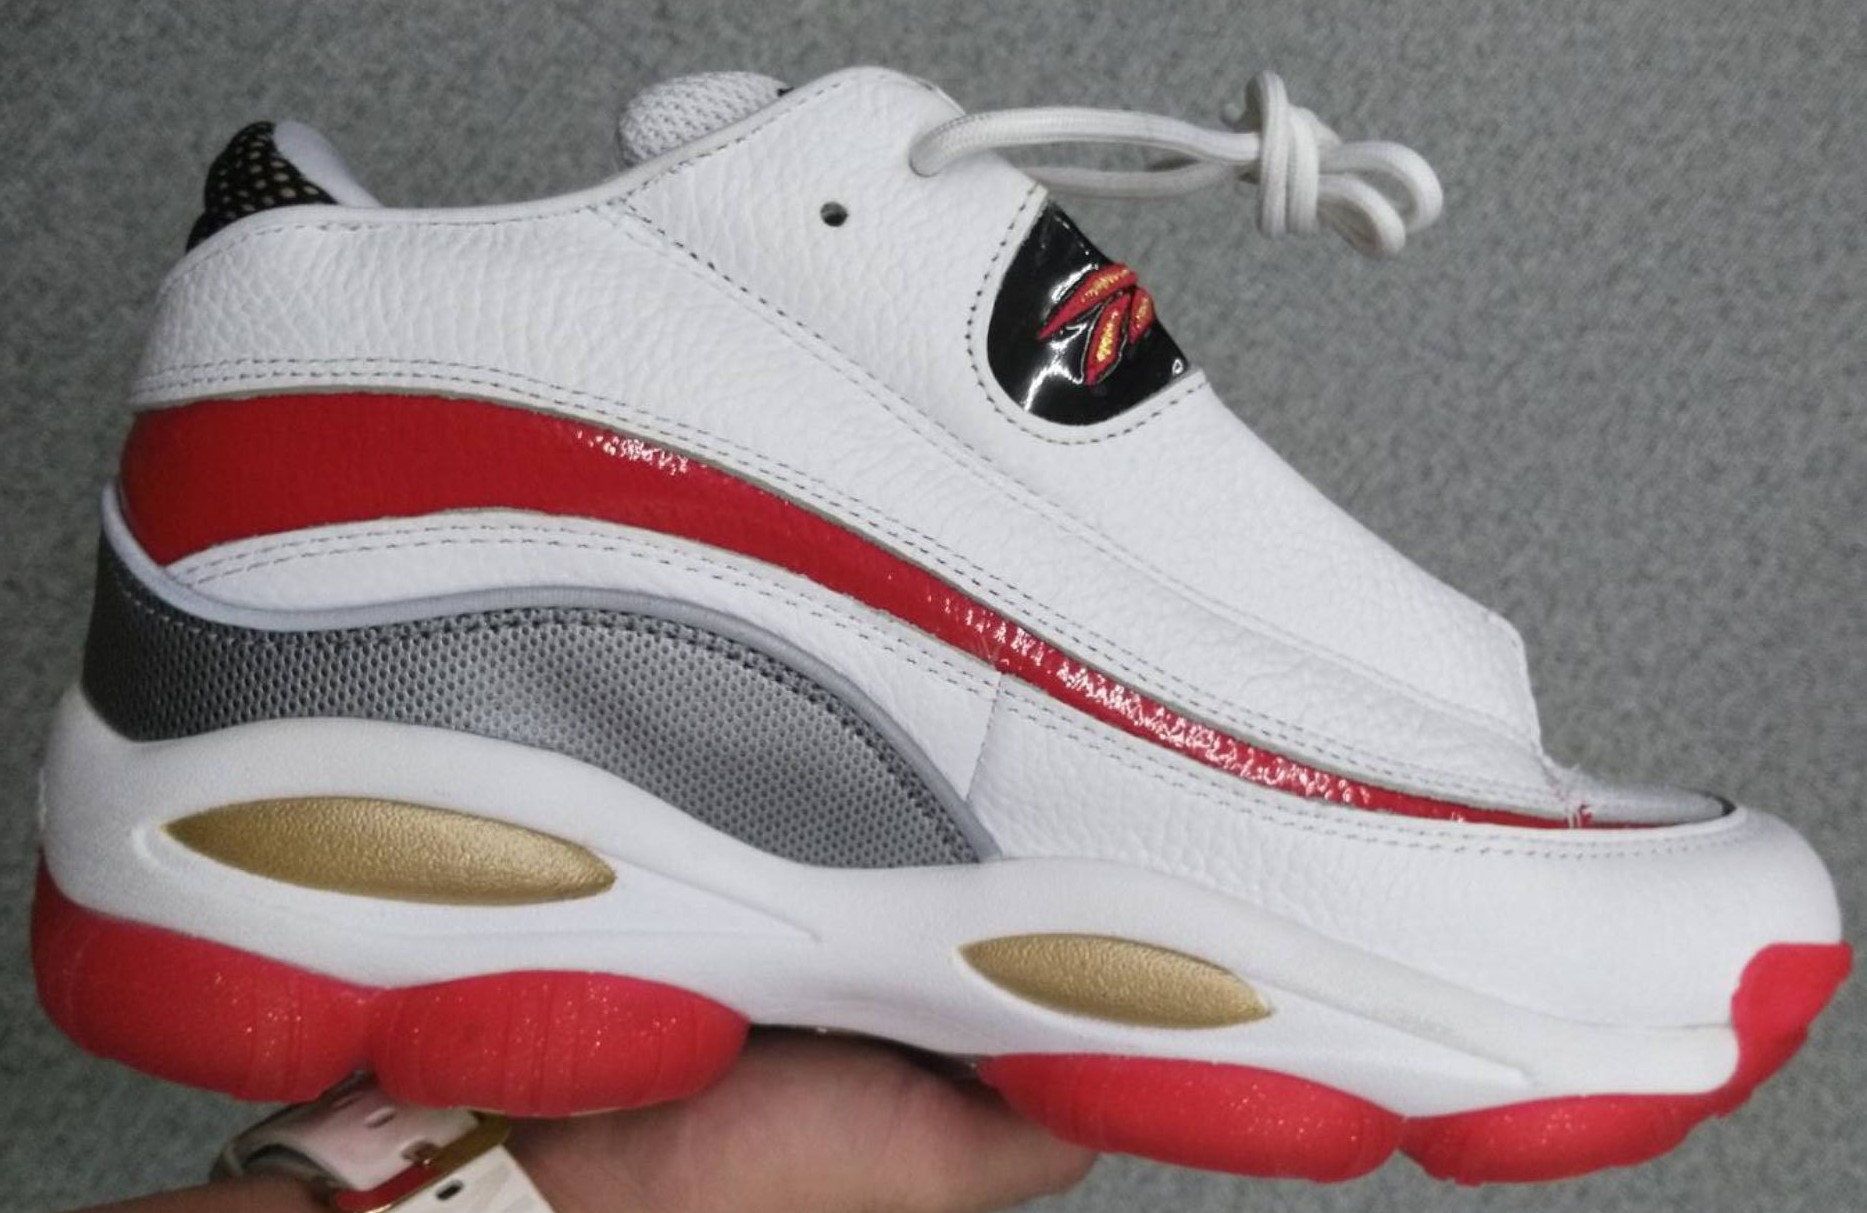 The Reebok Answer 1 'Rookie of the Year 